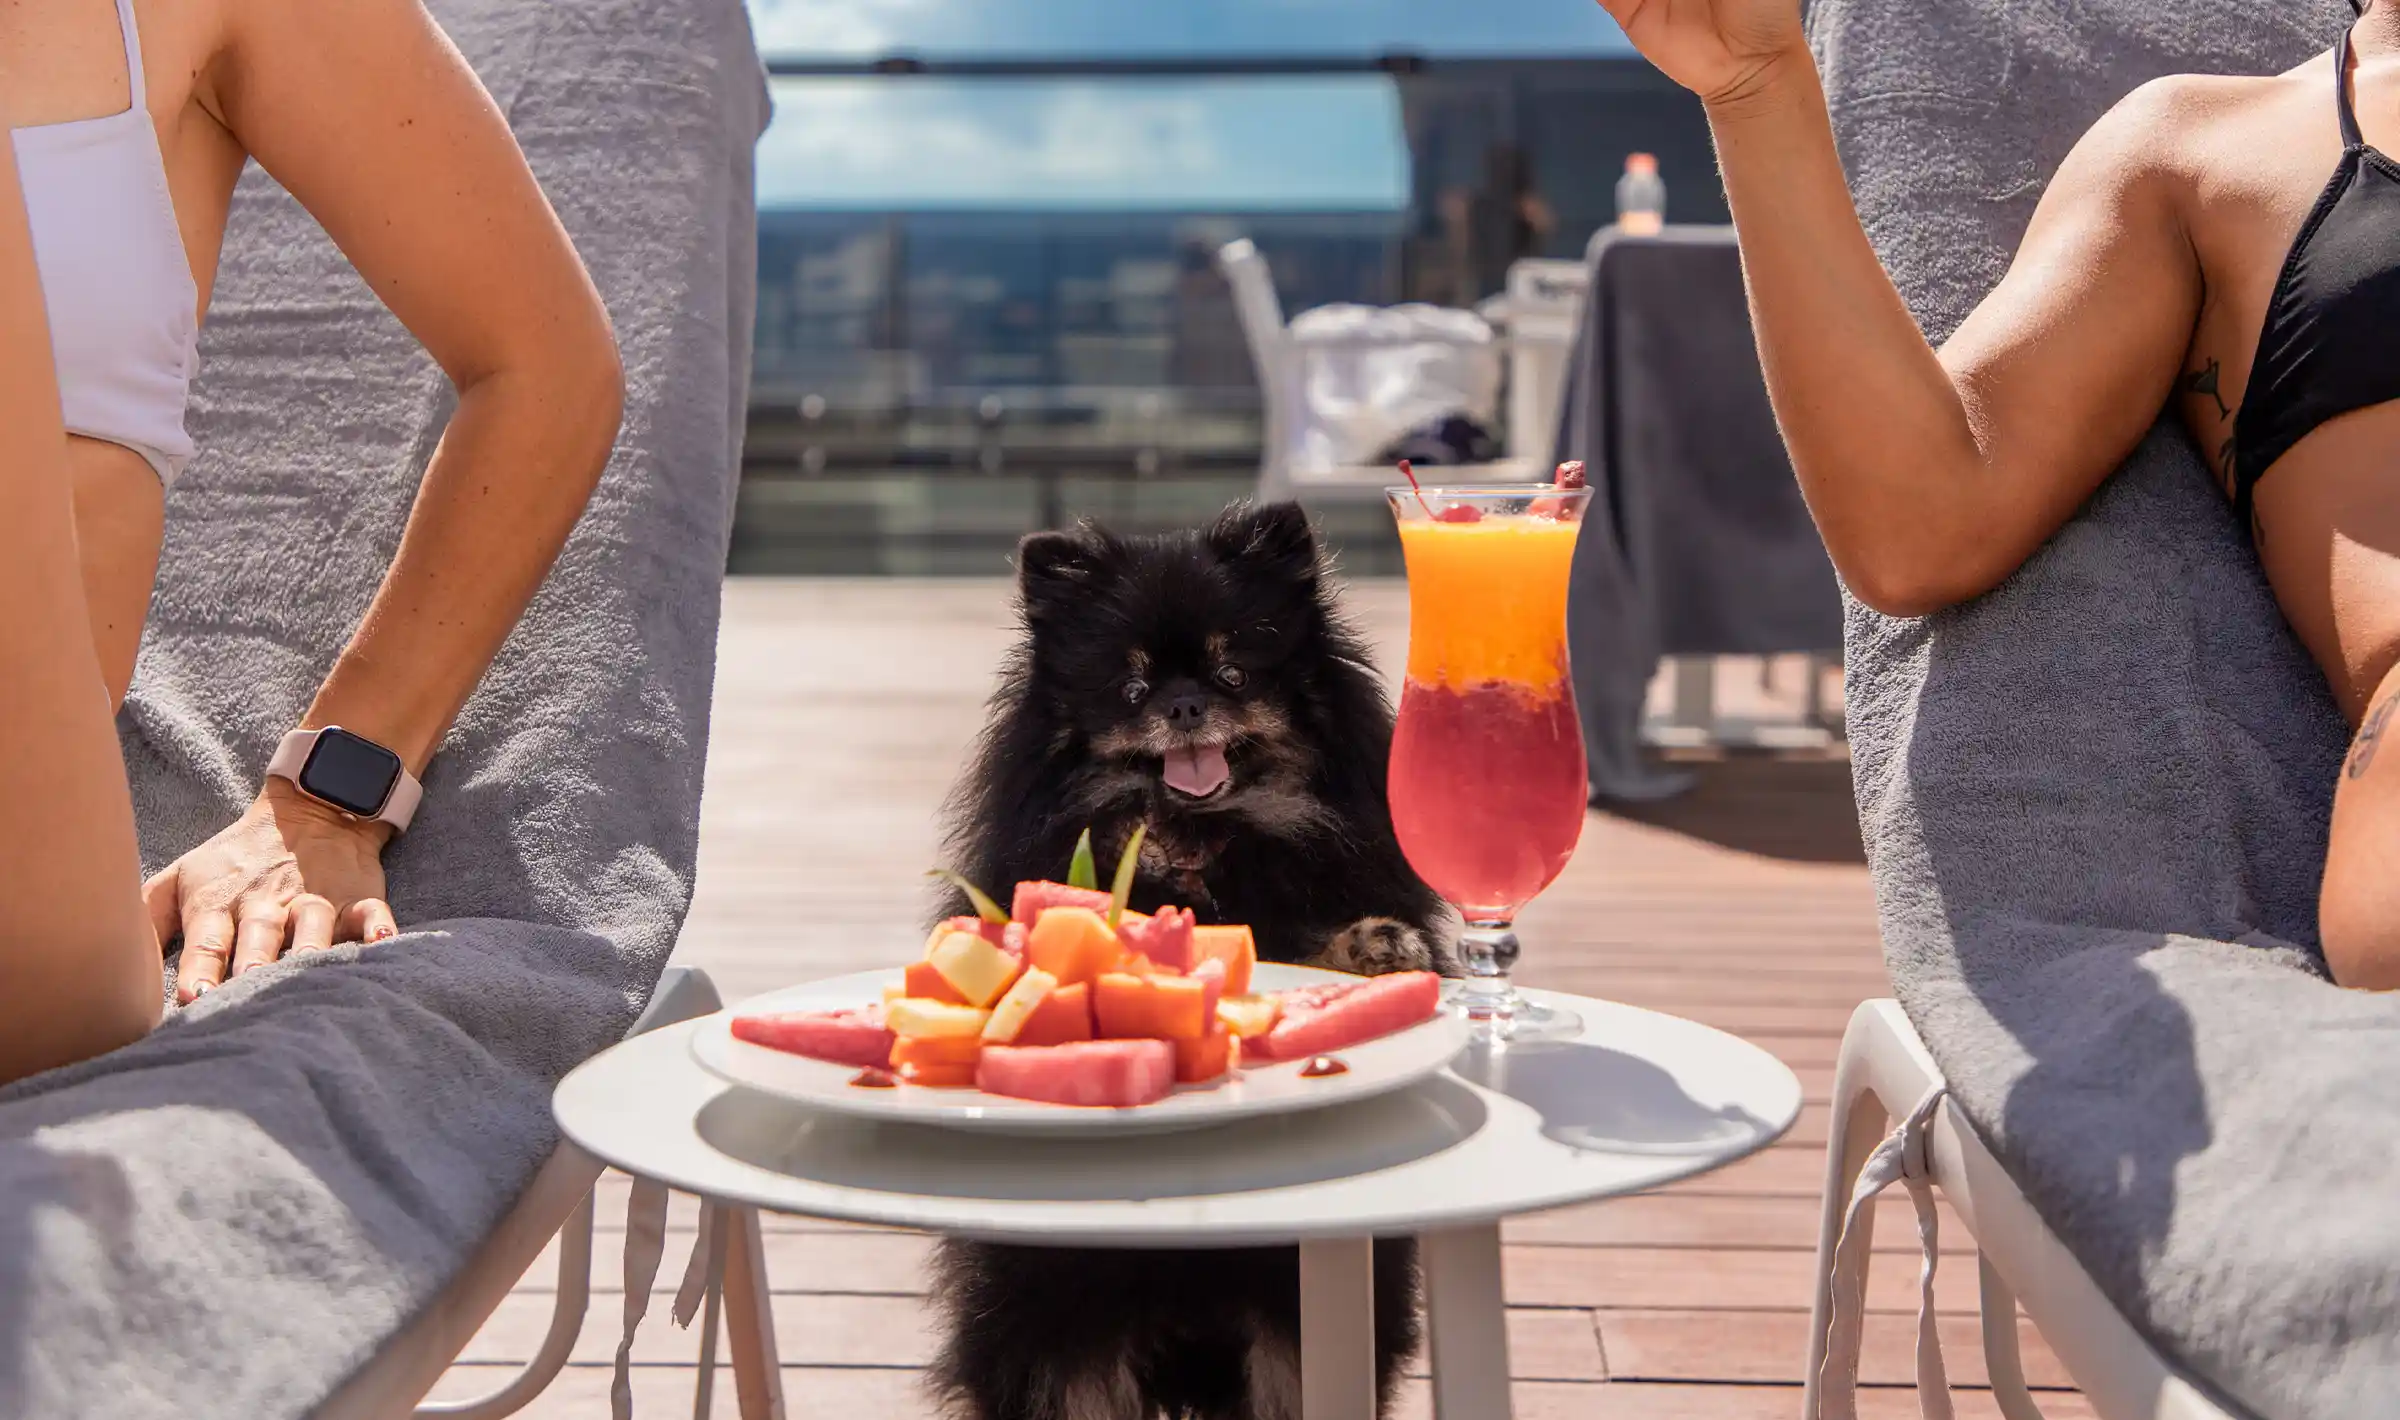 a dog sitting at a table with a plate of fruit and a drink